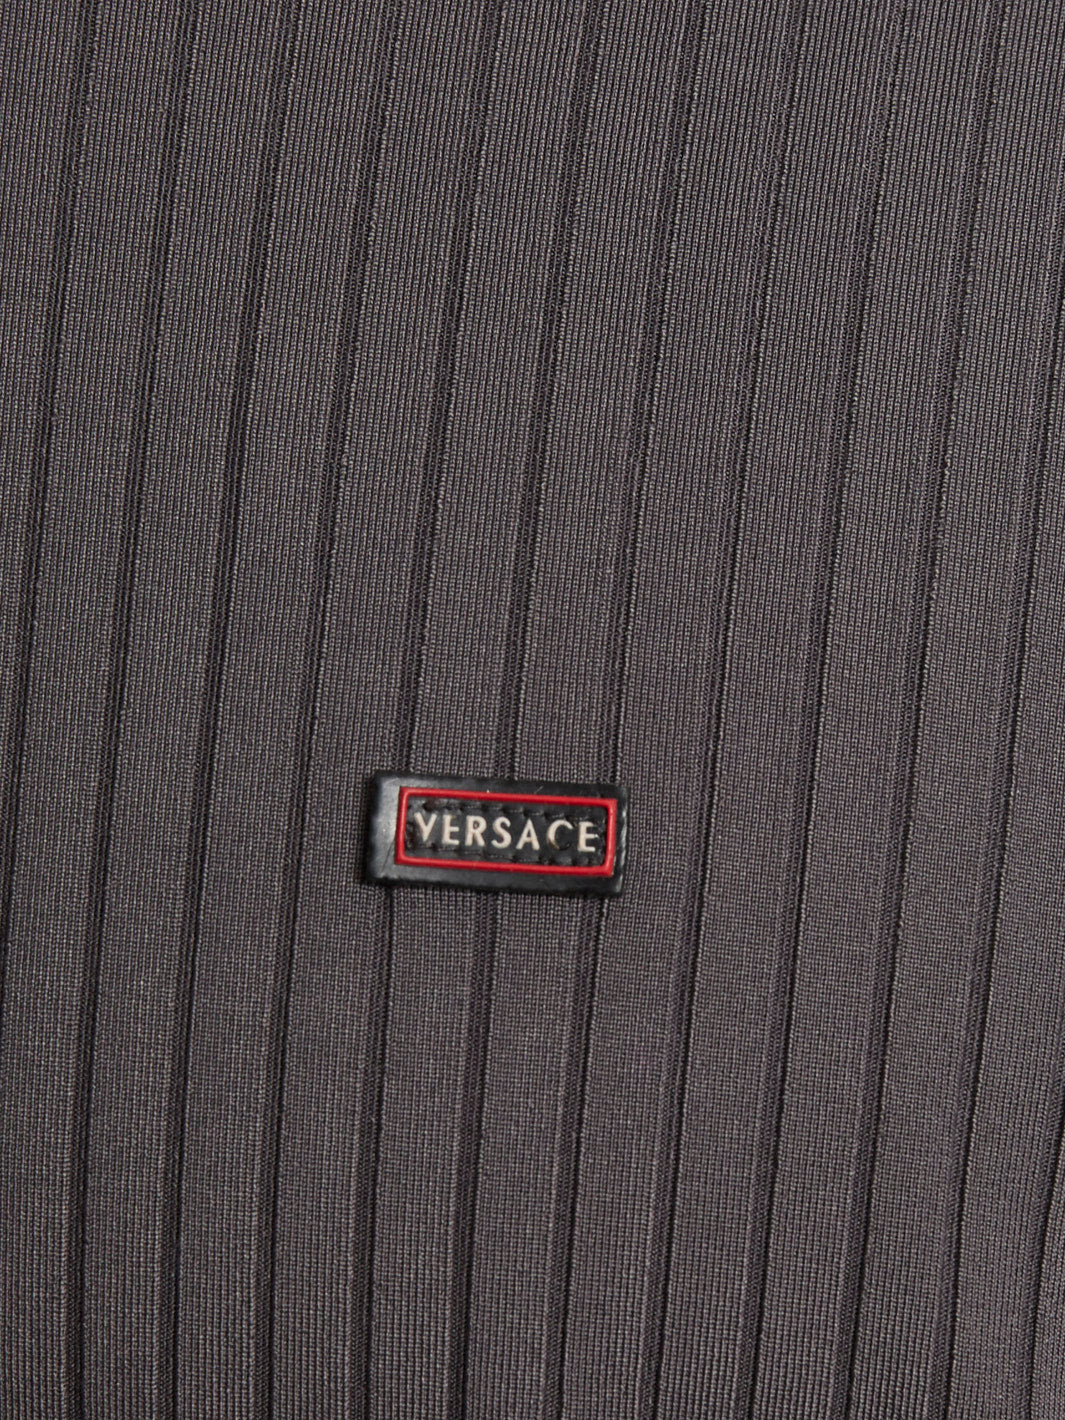 Y2K Versace grey T-shirt in technical fabric with V-neckline